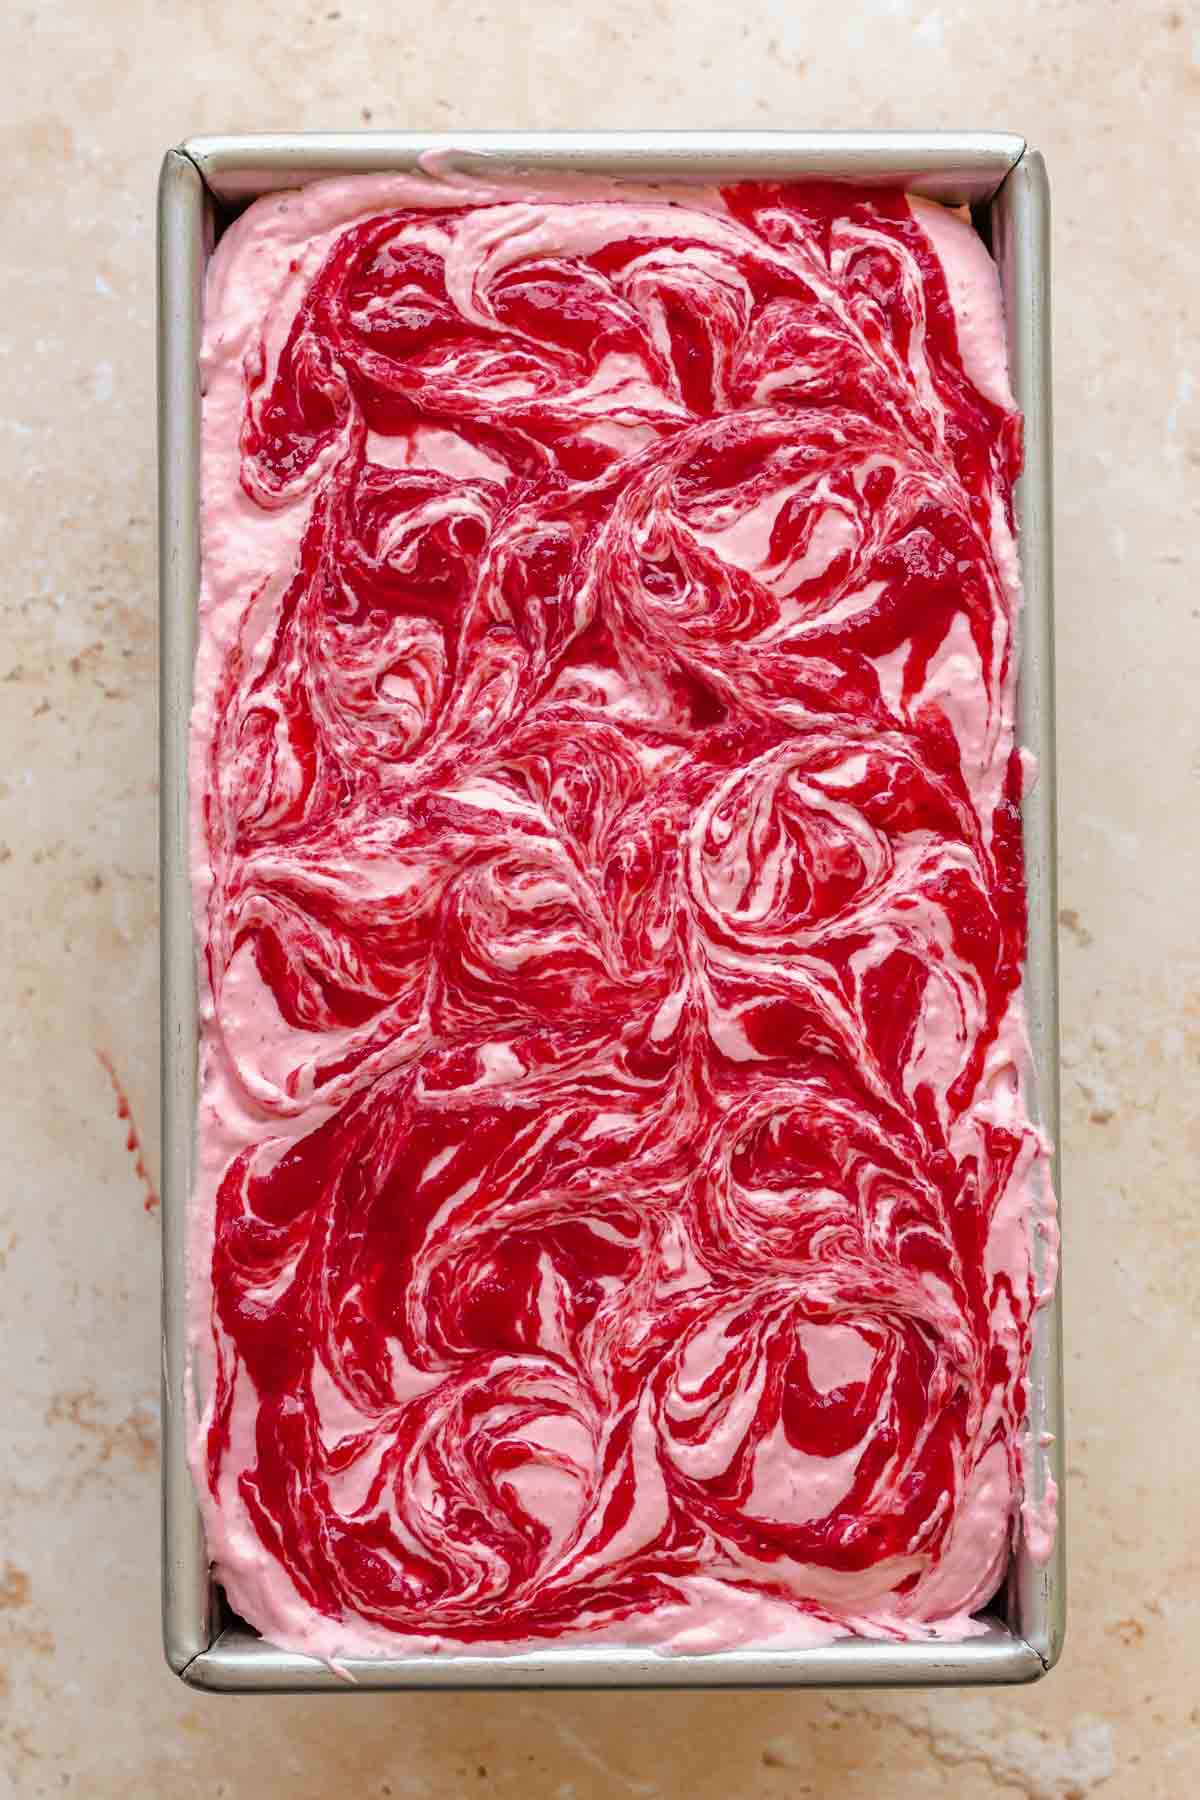 Strawberry ice cream filling a metal loaf pan. Swirls are on top.